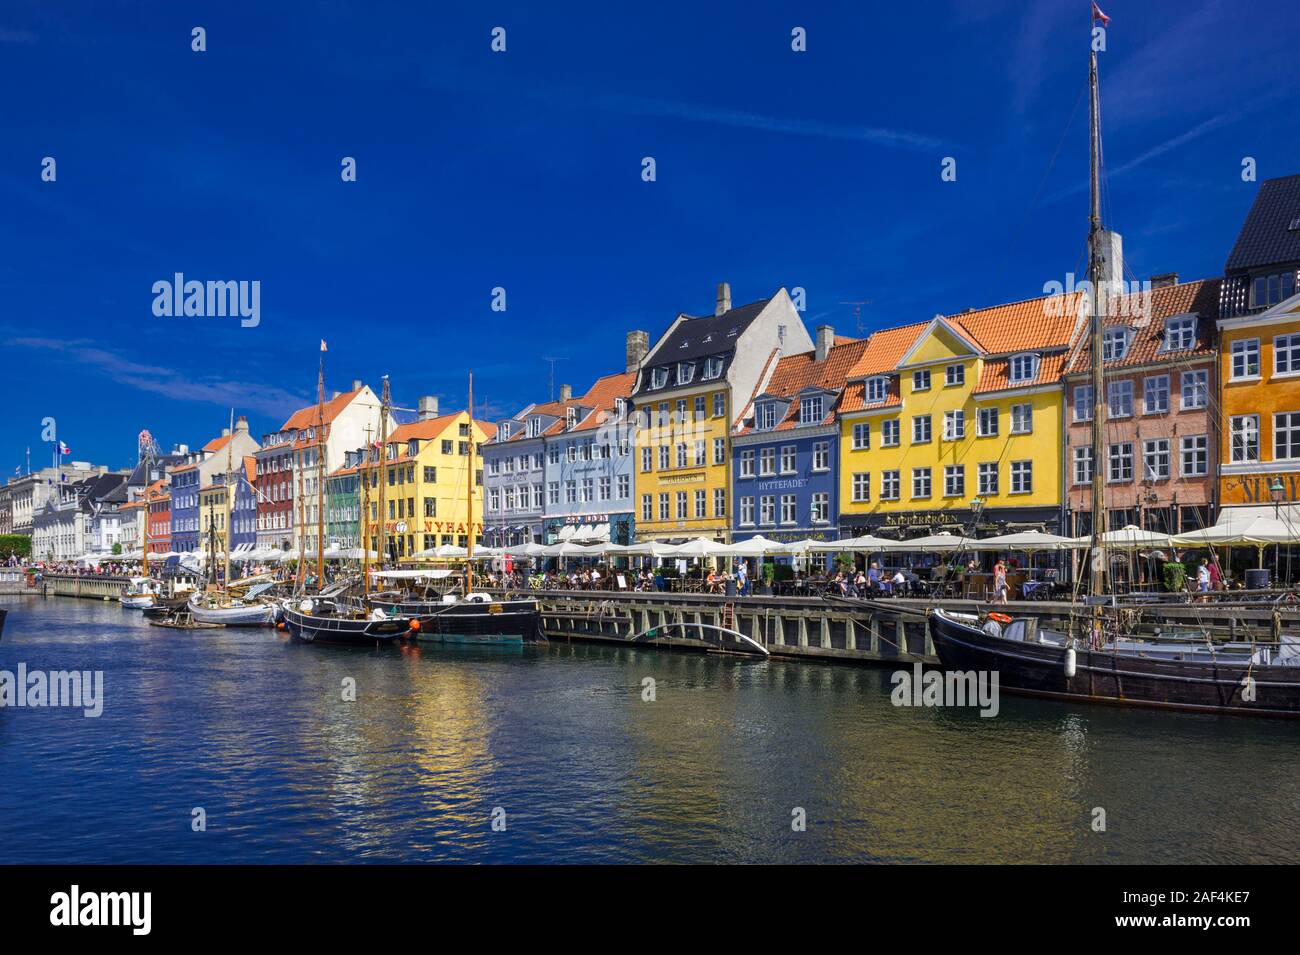 Small sailing boats on the Nyhavn canal in front of bright coloured buildings in Copenhagen, Denmark Stock Photo